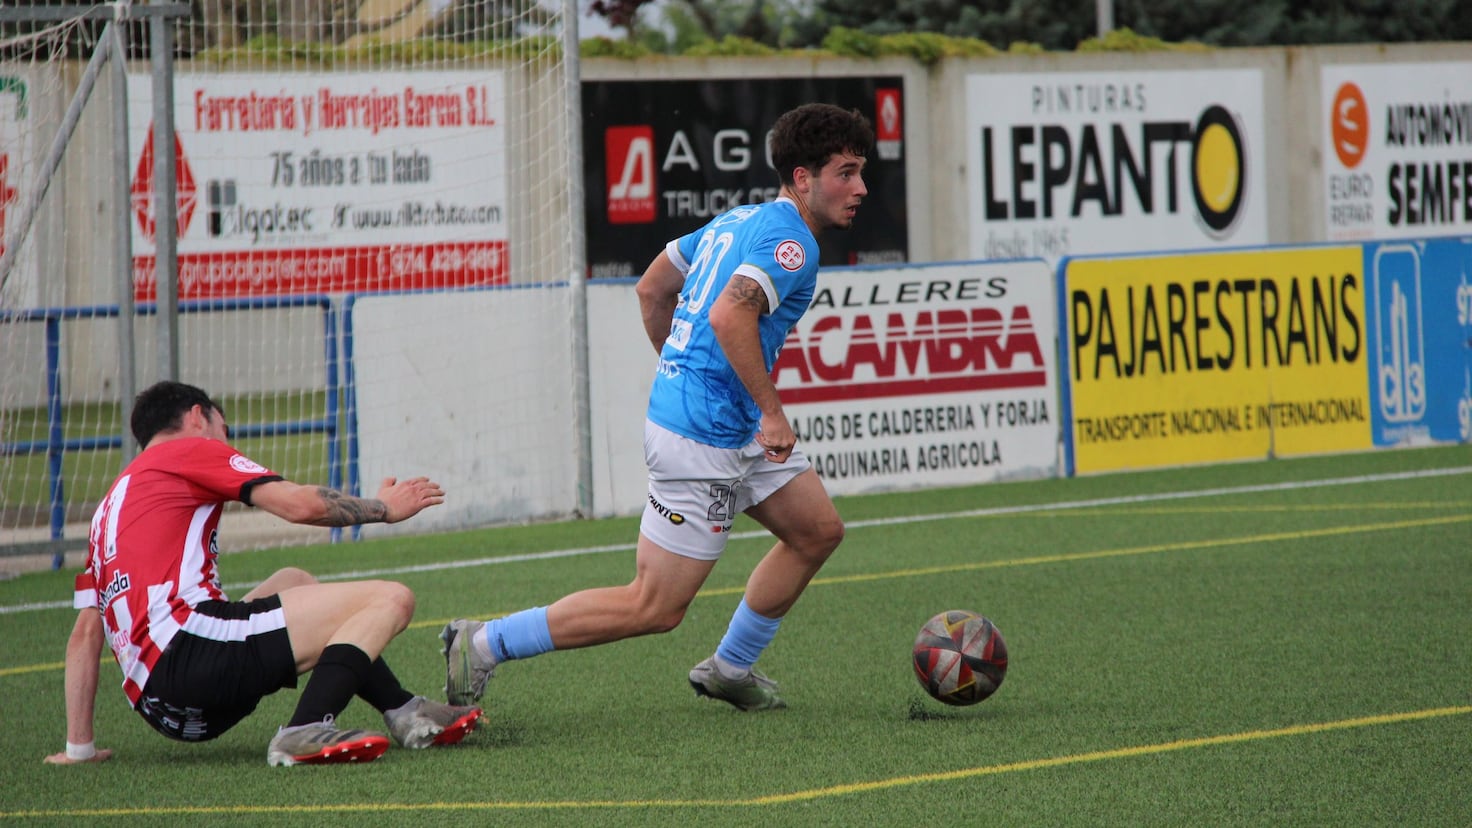 Ejea clings to leadership in a narrow victory against Cariñena